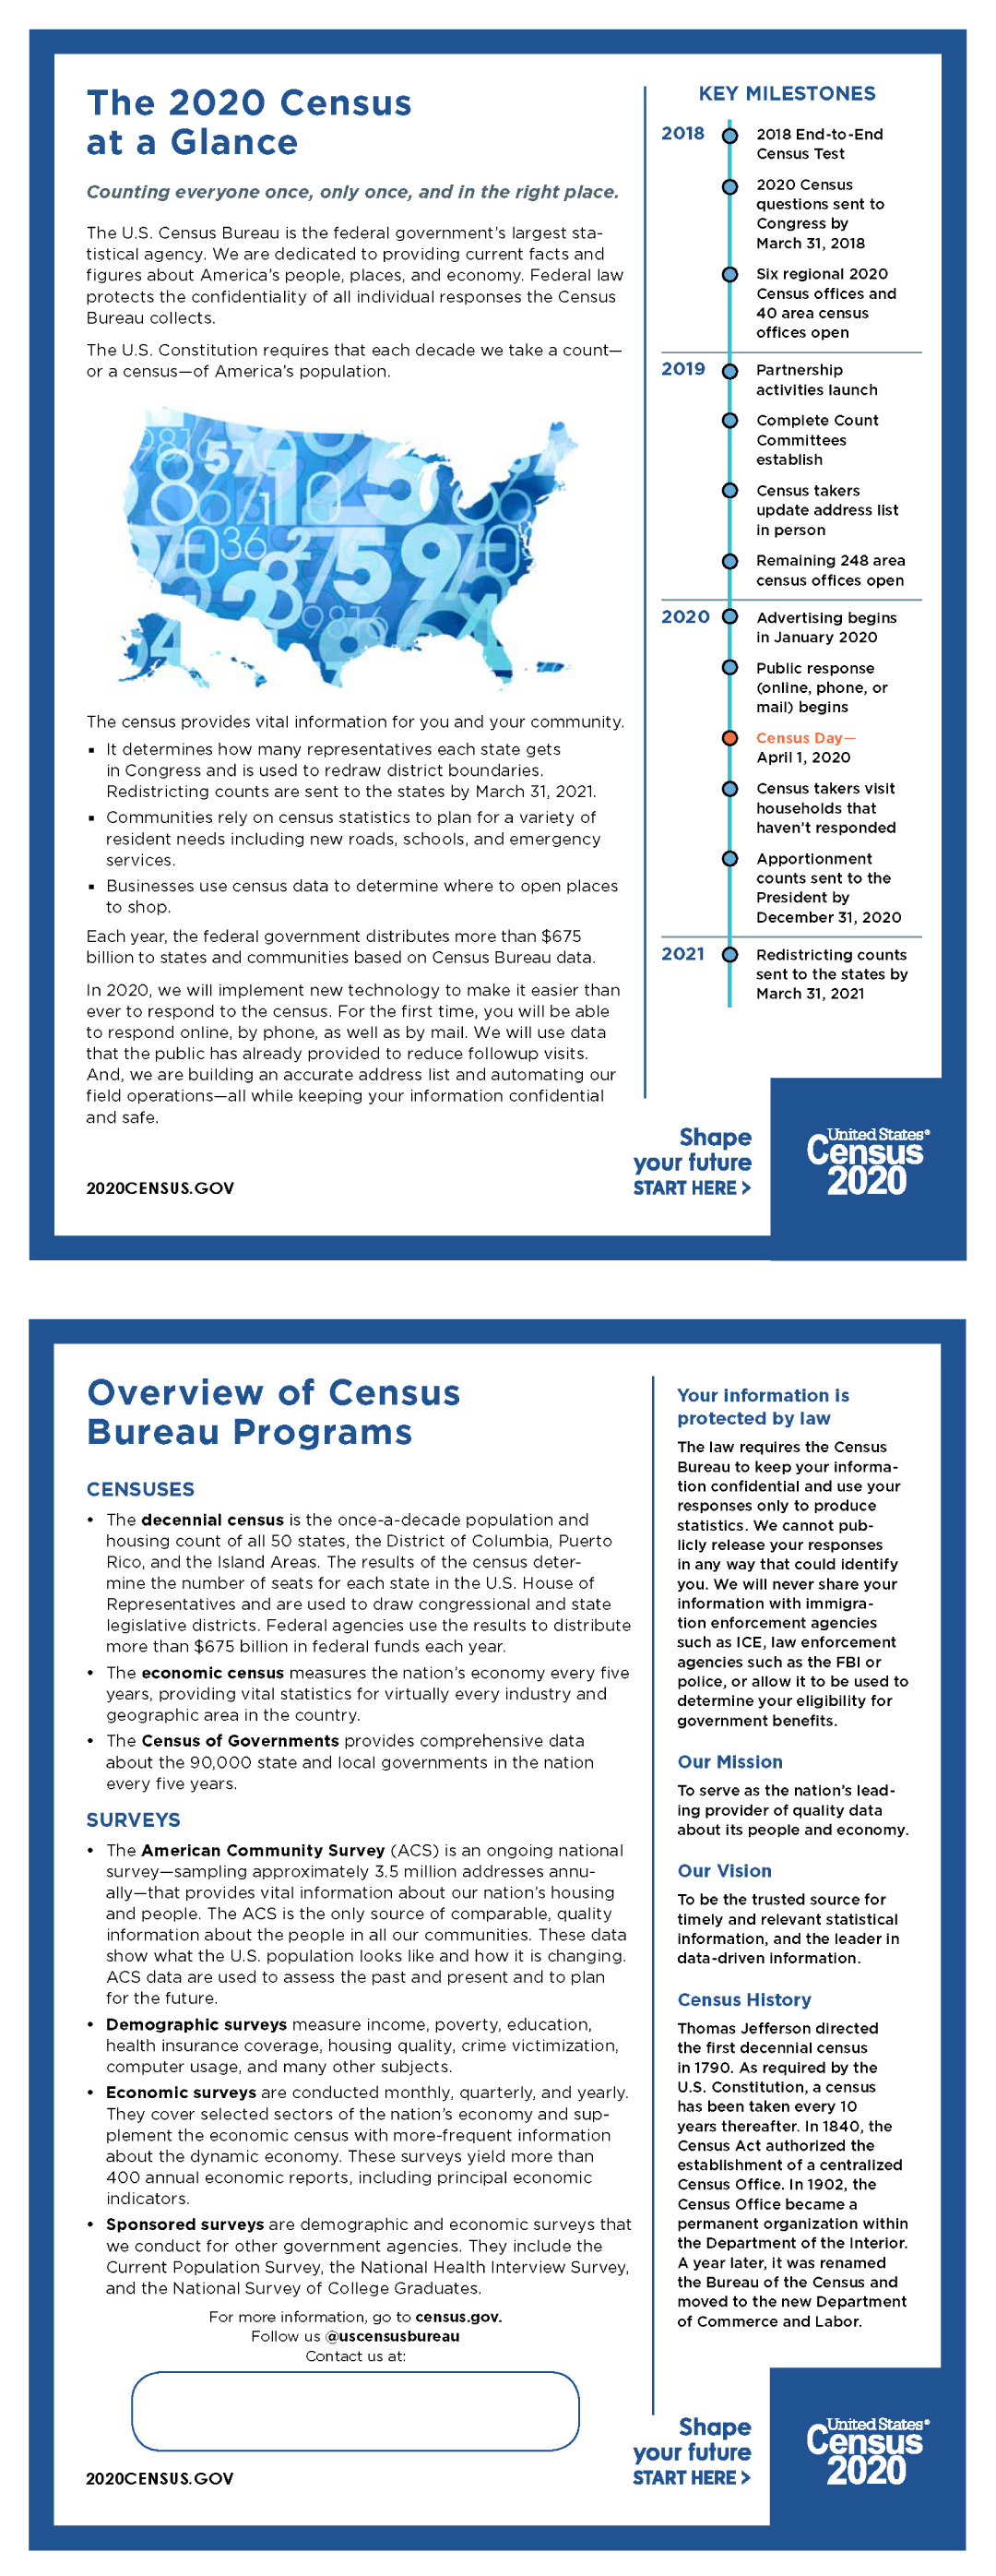 The 2020 Census at a Glance